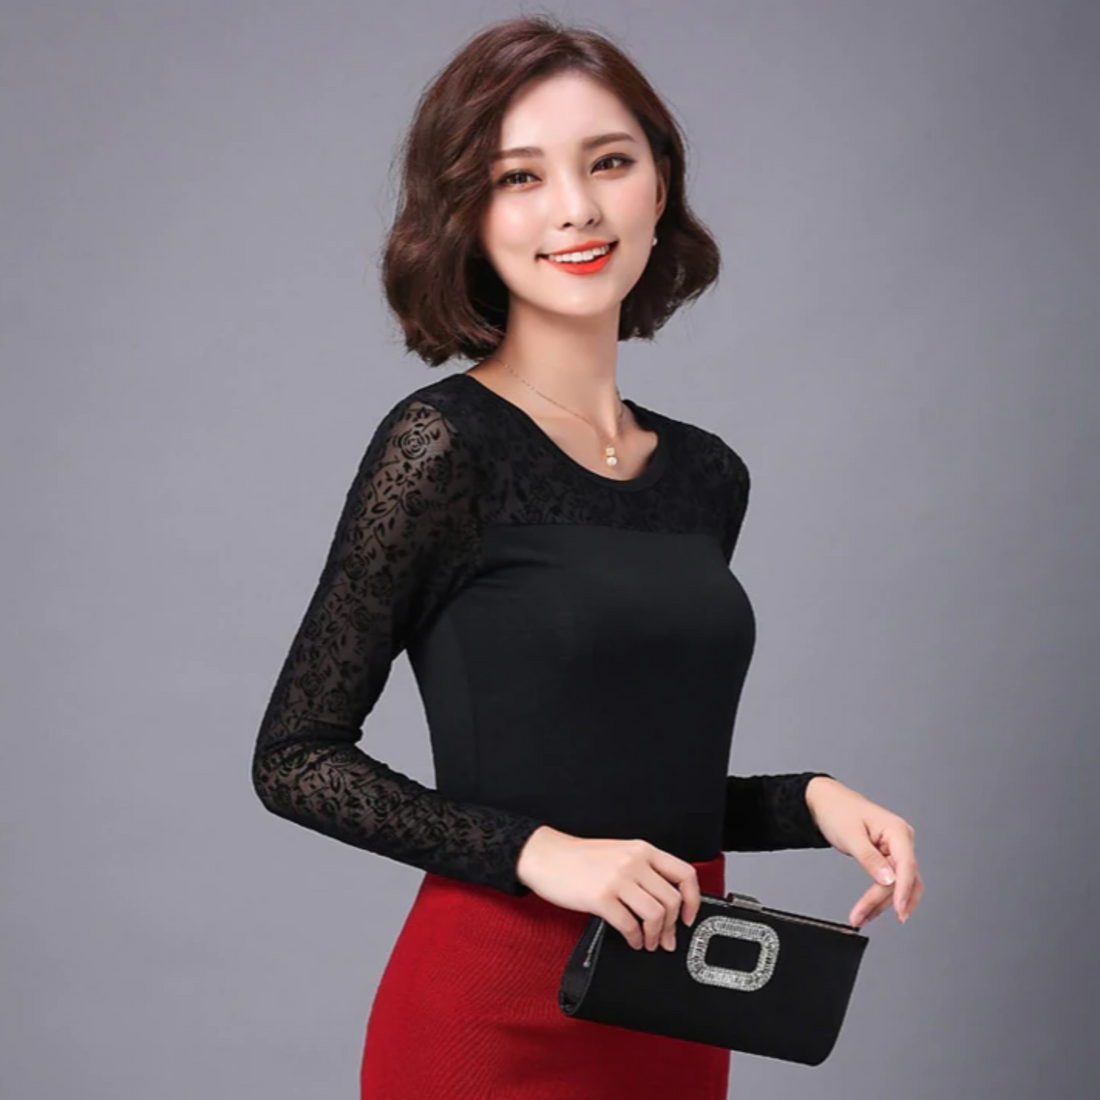 Women's Summer Casual Lace O-Neck Long-Sleeved Blouse